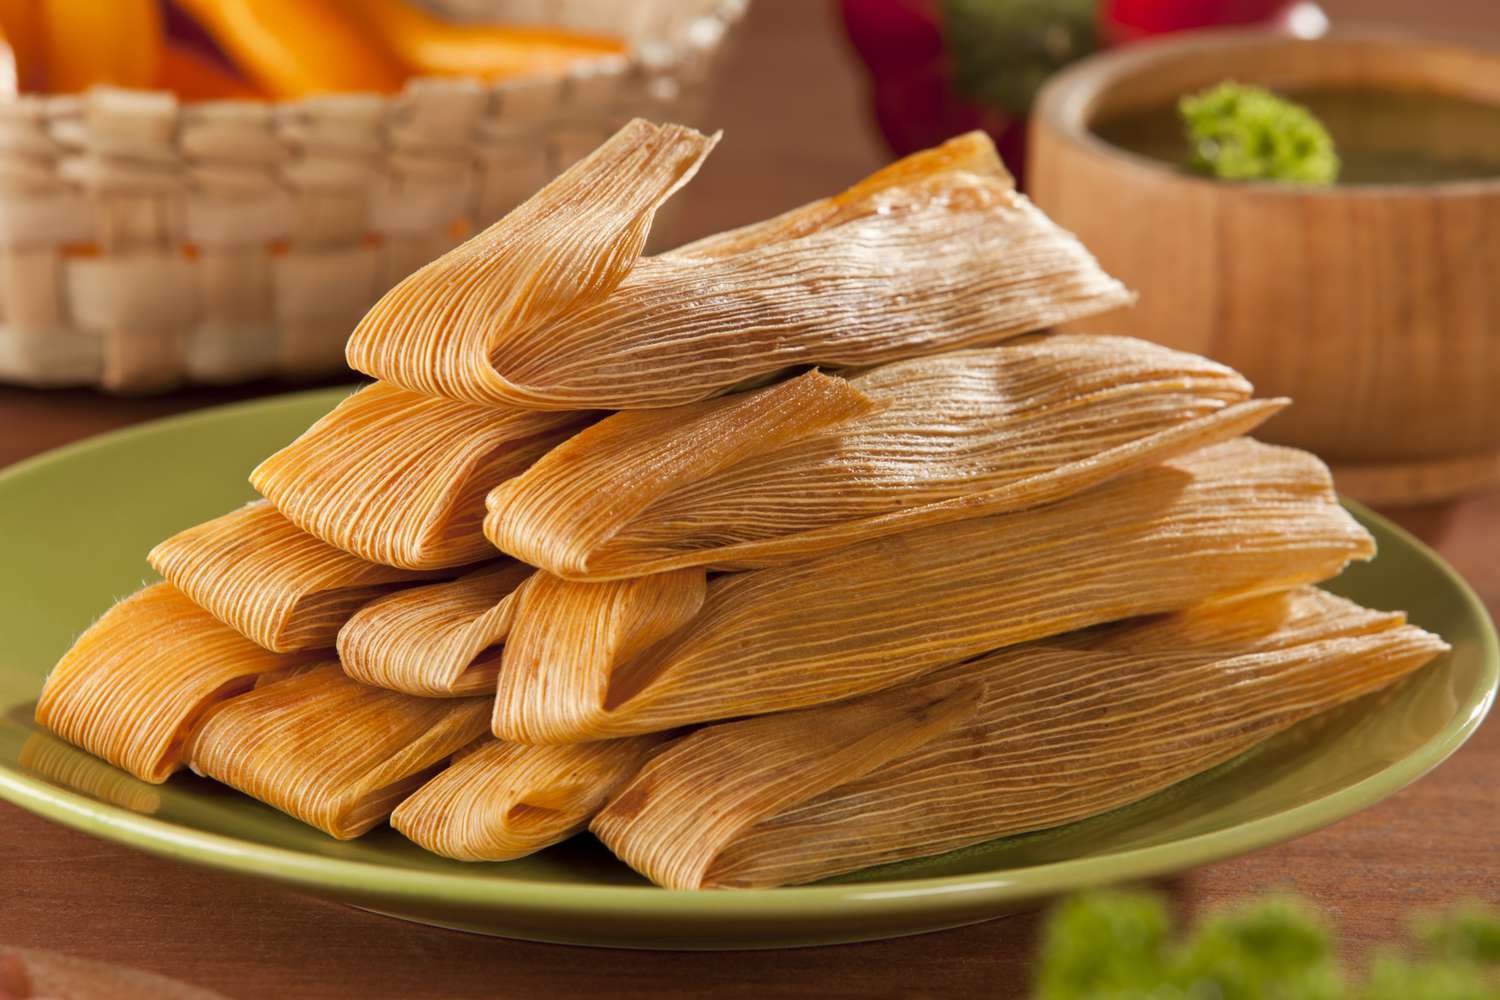 What Mexican Food is Wrapped in Corn Husks: A Guide to Tamales